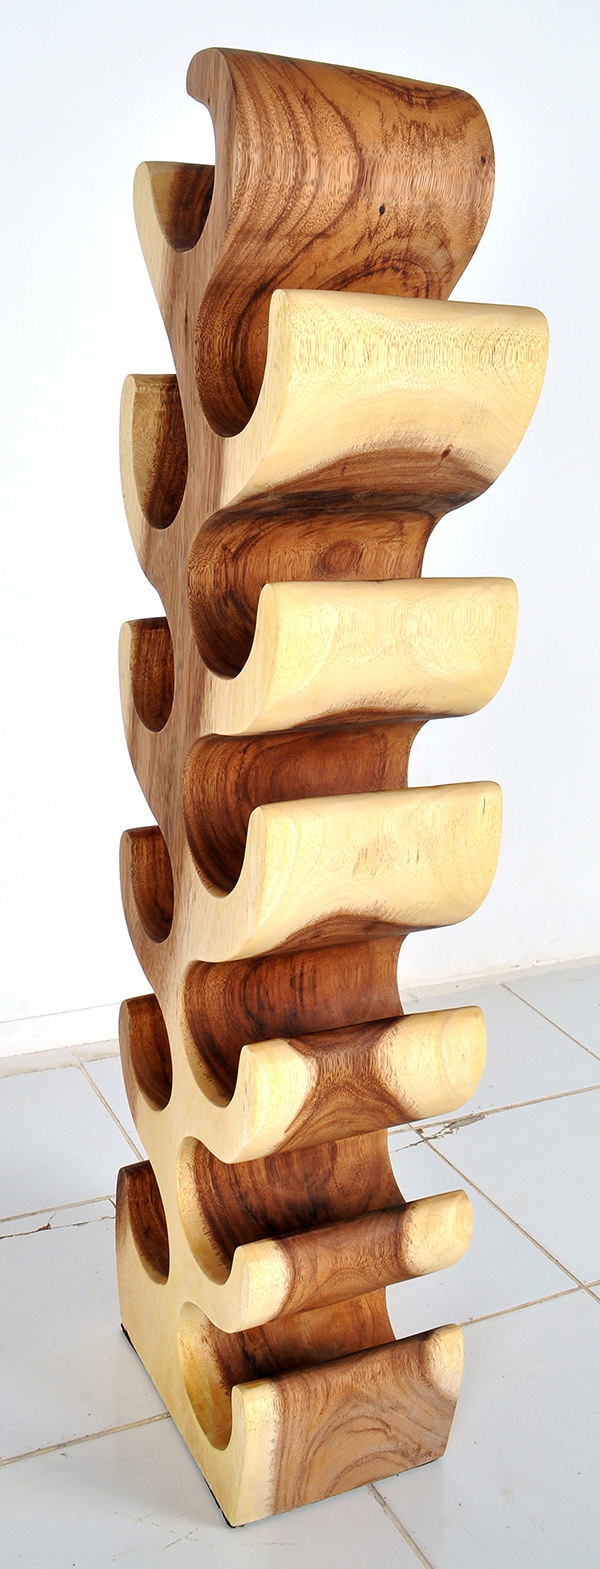 Solid accacia wooden wine rack